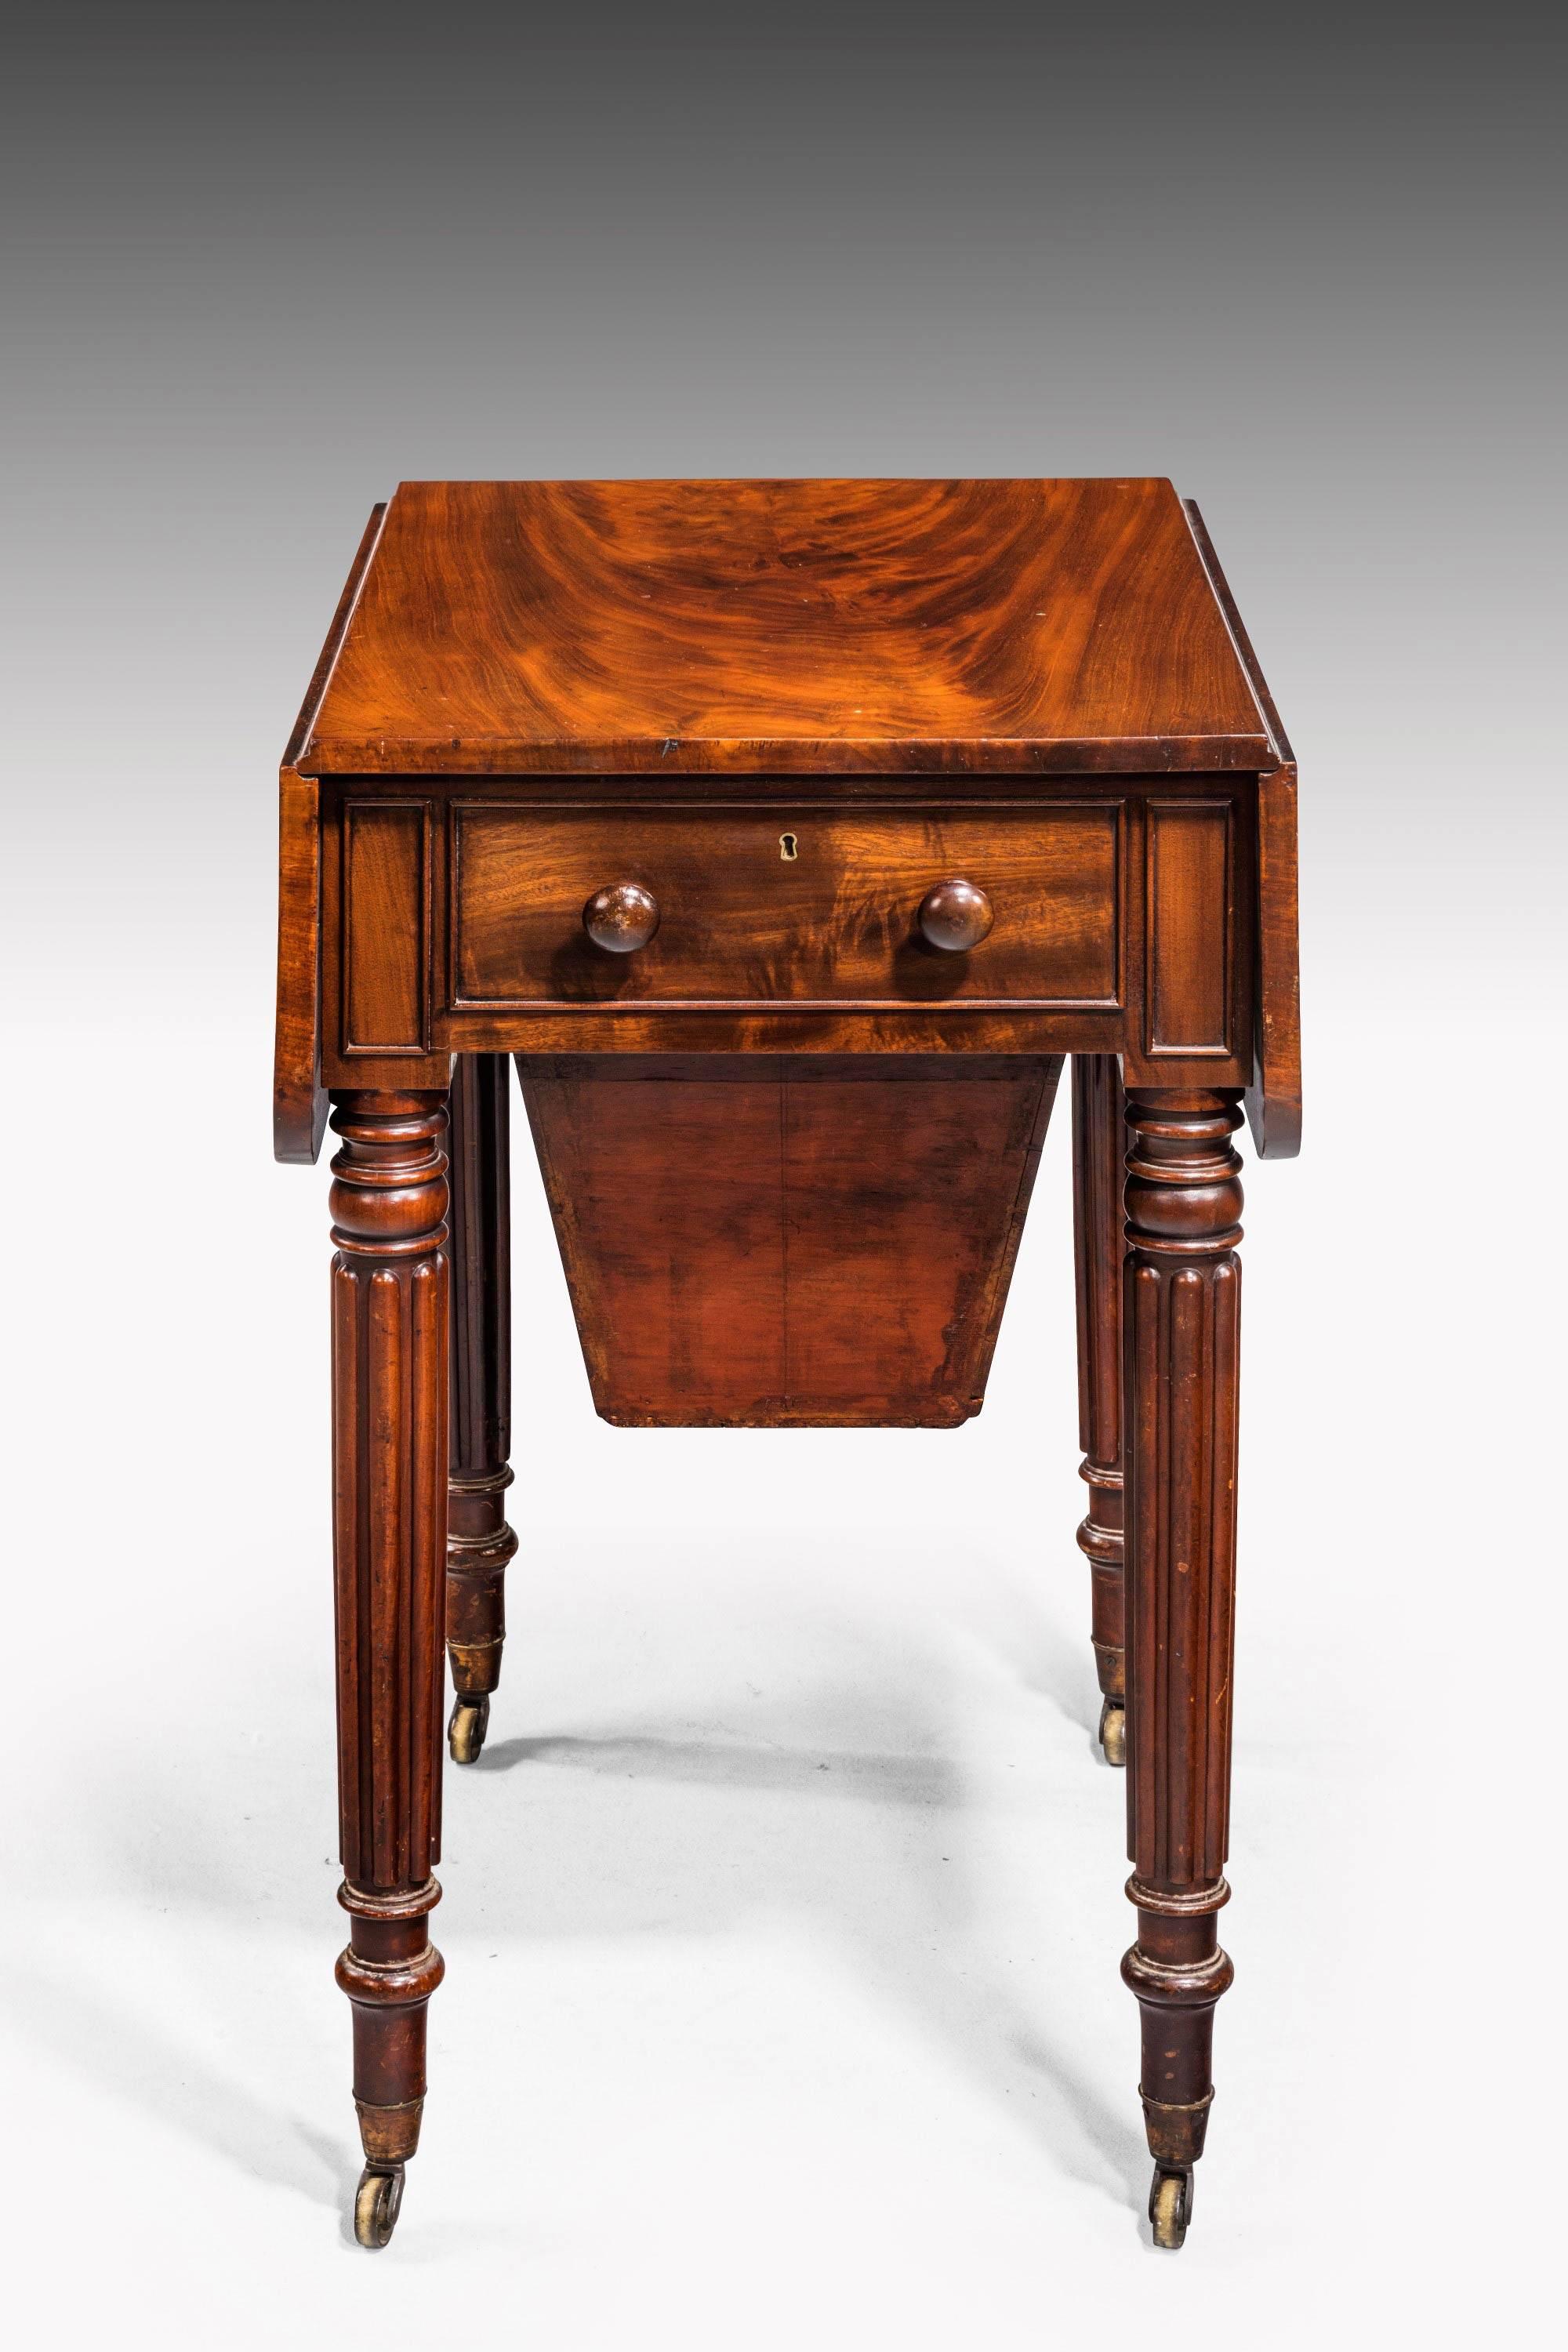 Regency Period Mahogany Pembroke Work Table with a Sewing Basket 1